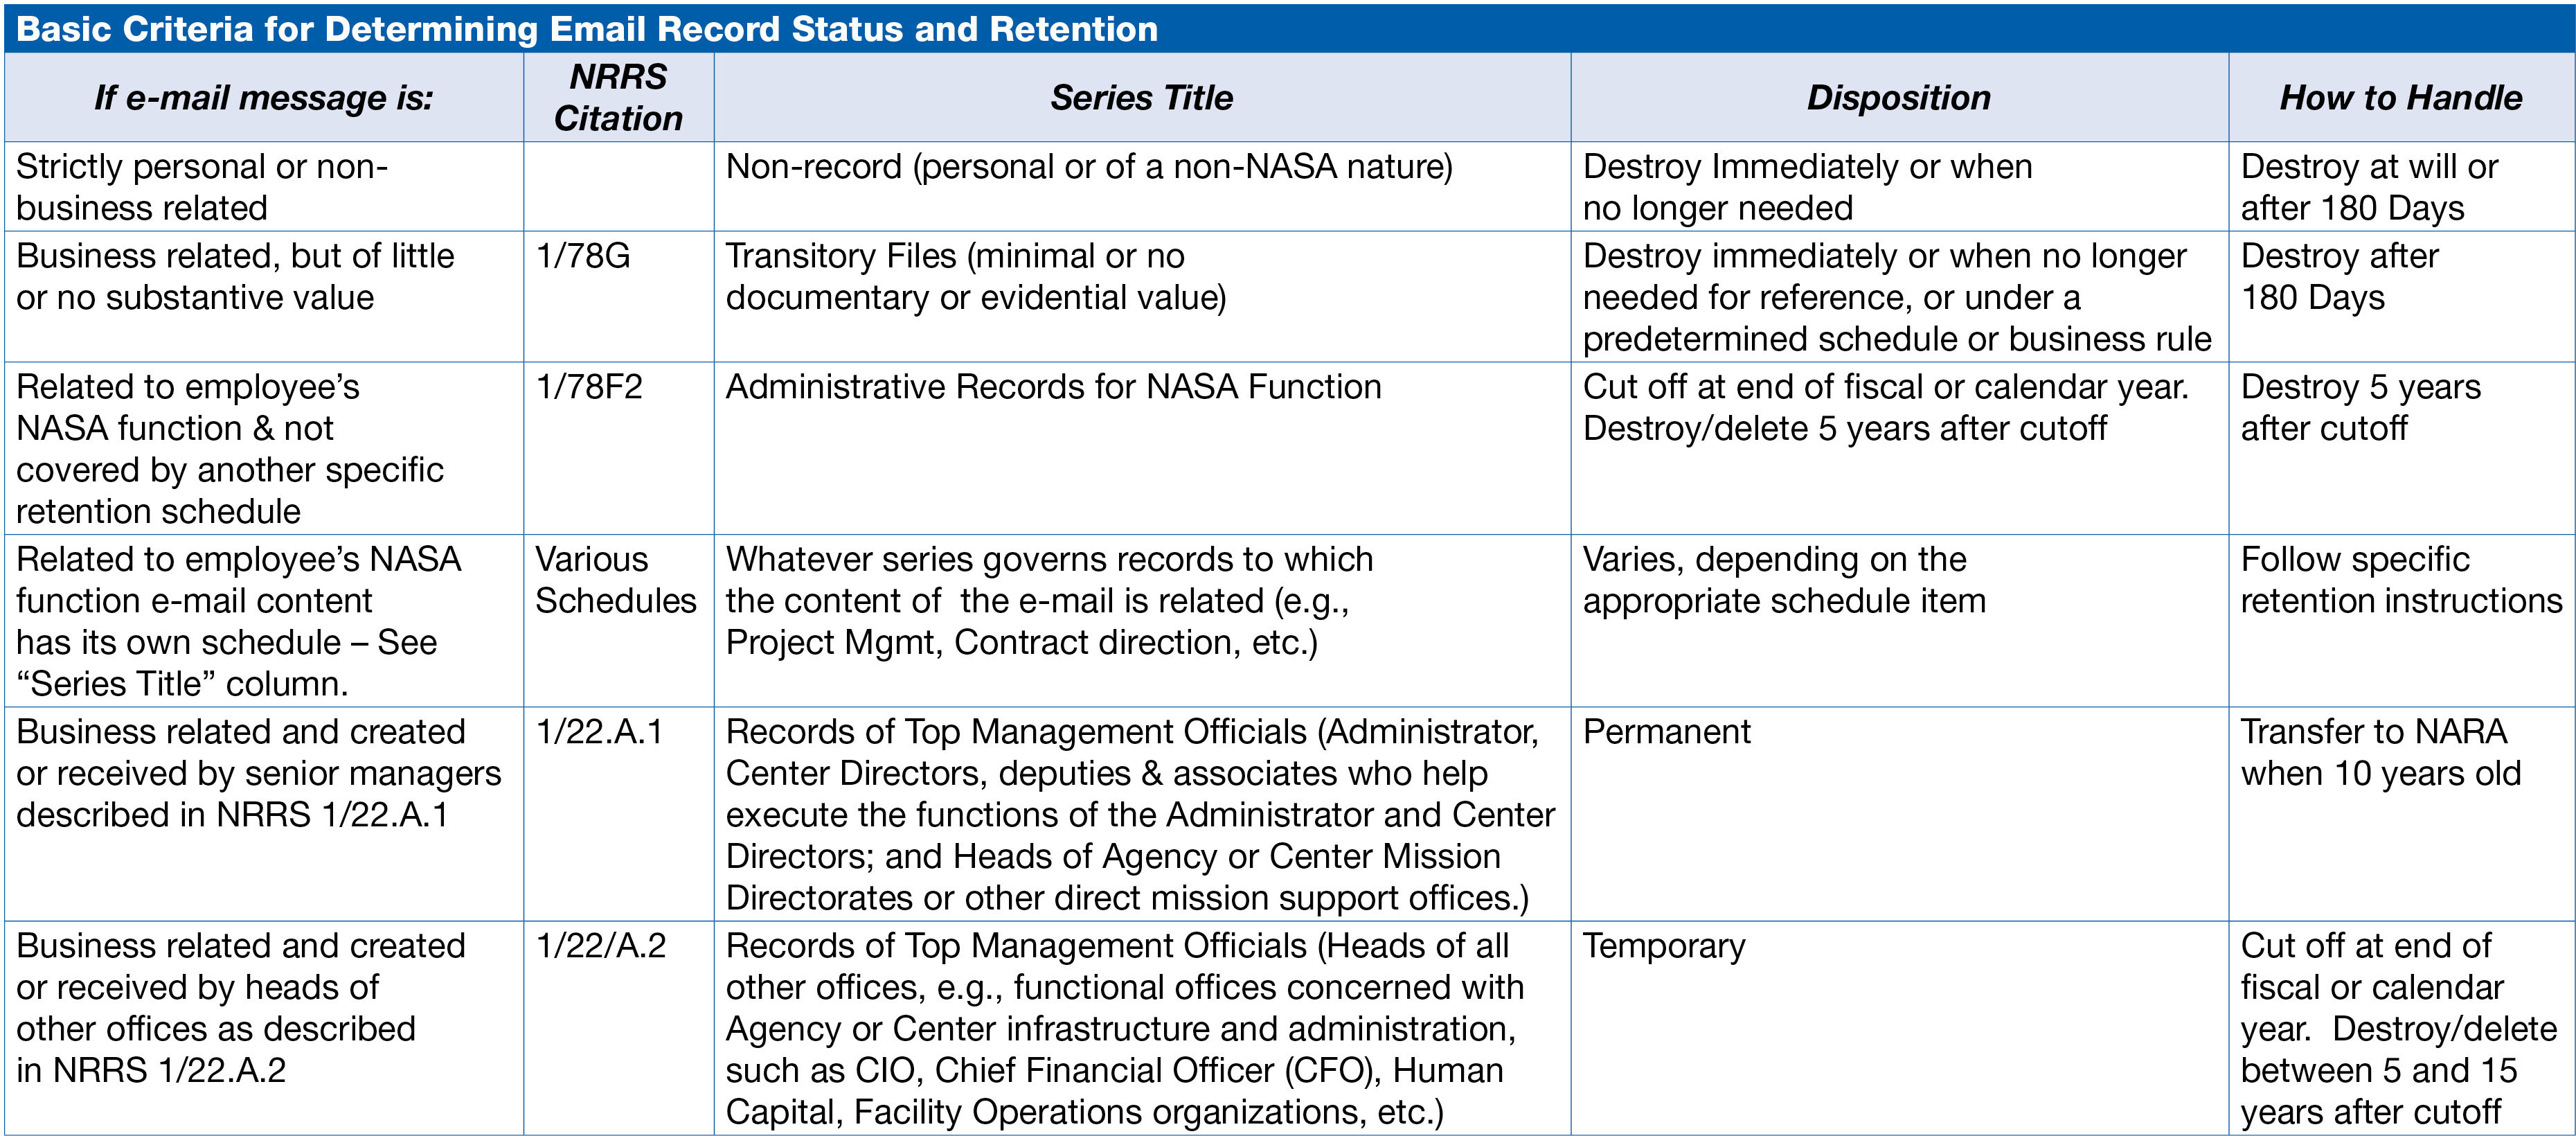 Table A. Basic Criteria Determining E-mail Record Status and Retention